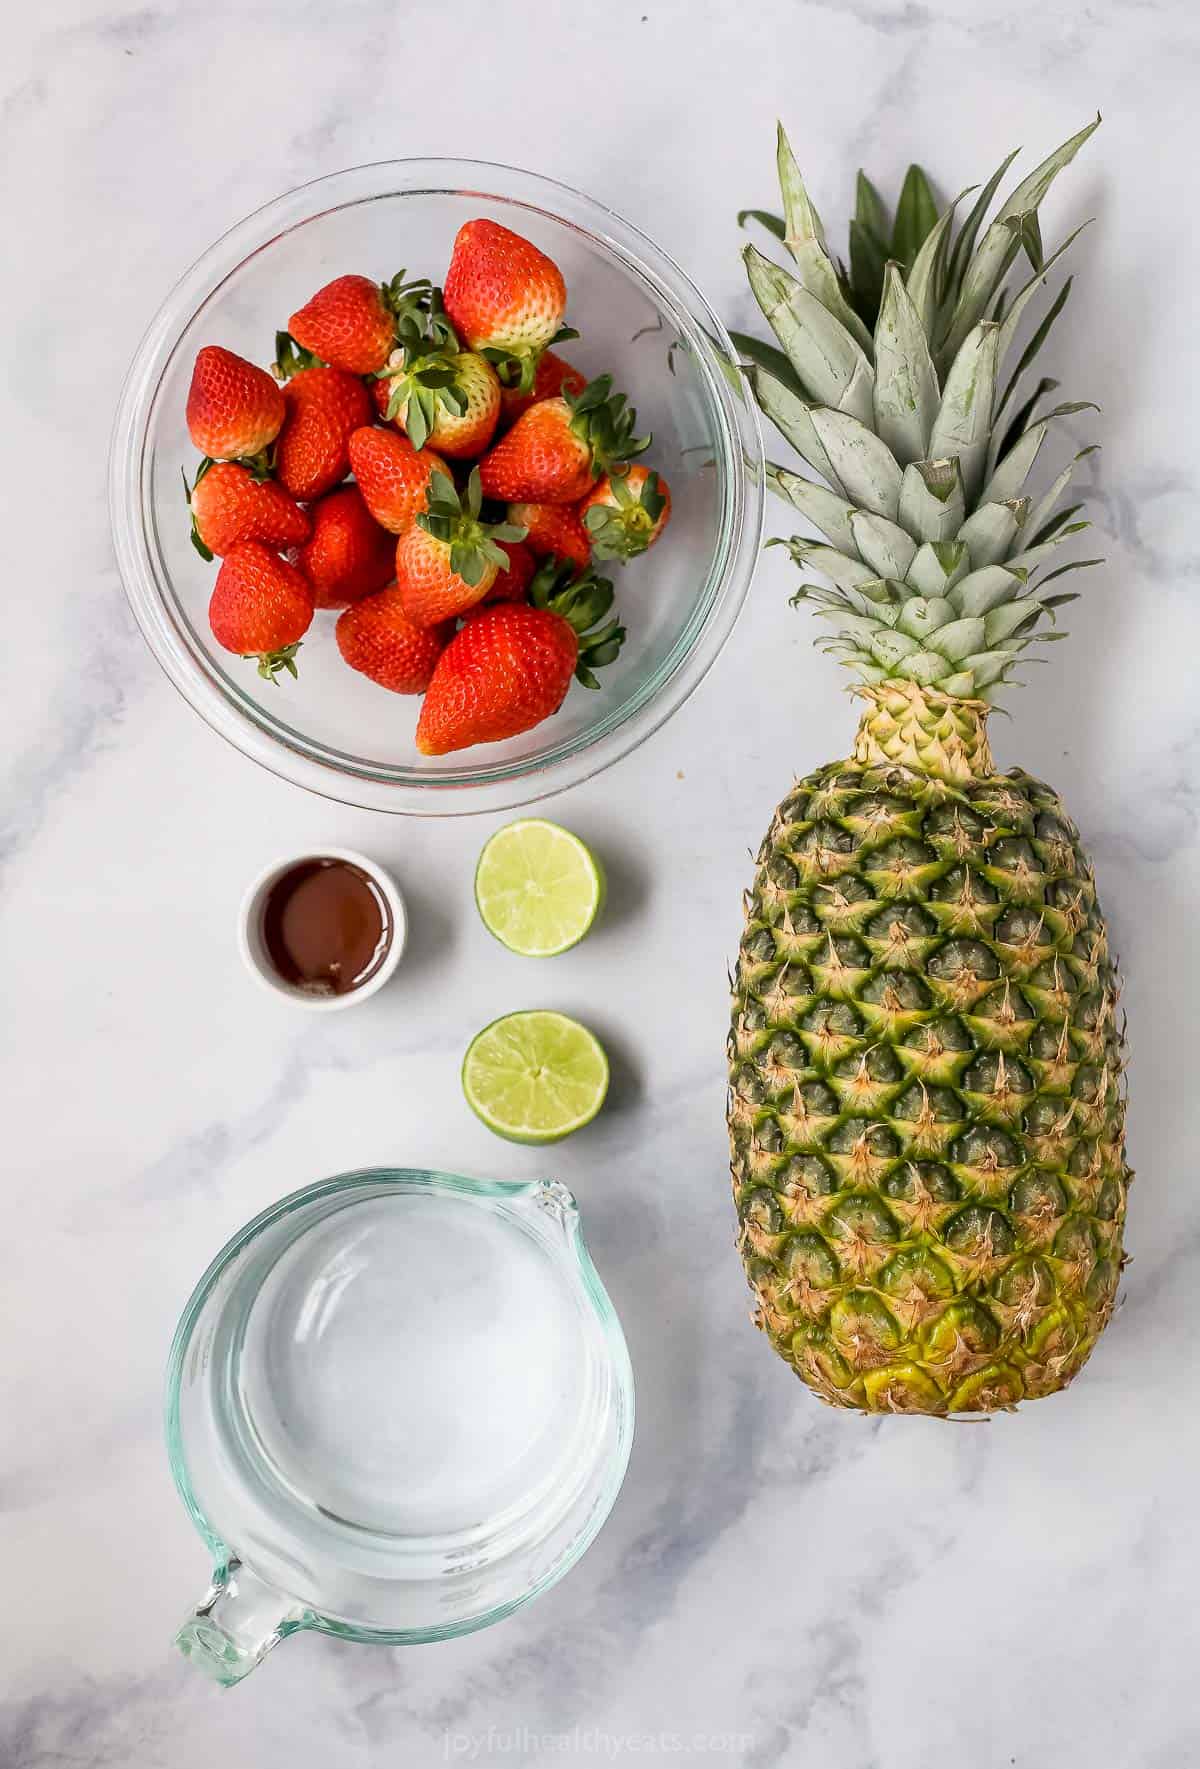 Overhead view of pineapple strawberry agua fresca ingredients